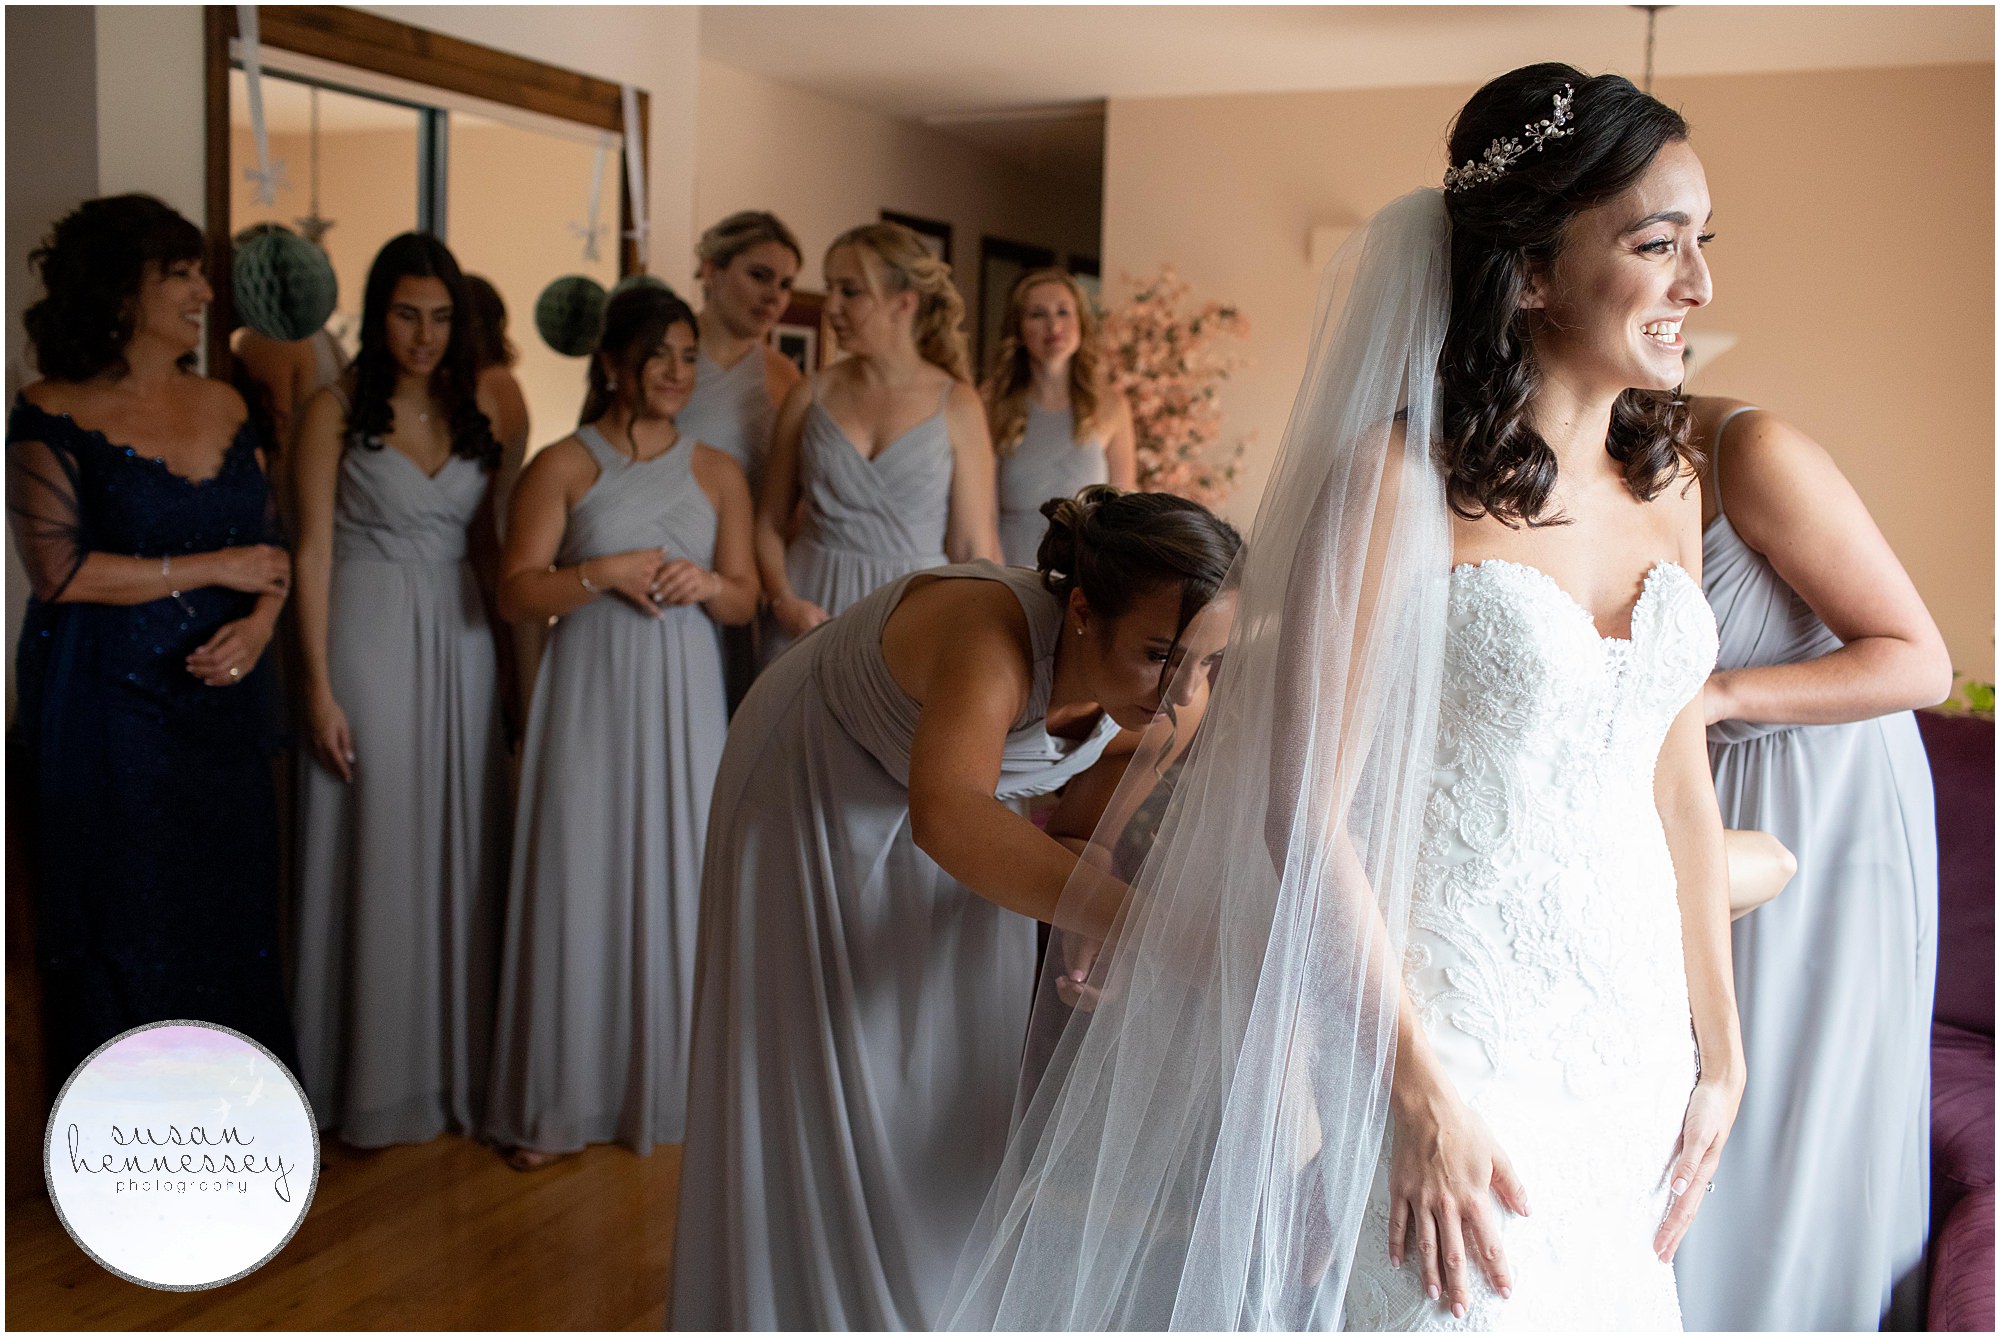 Bridesmaids look on while bride is buttoned into her gown